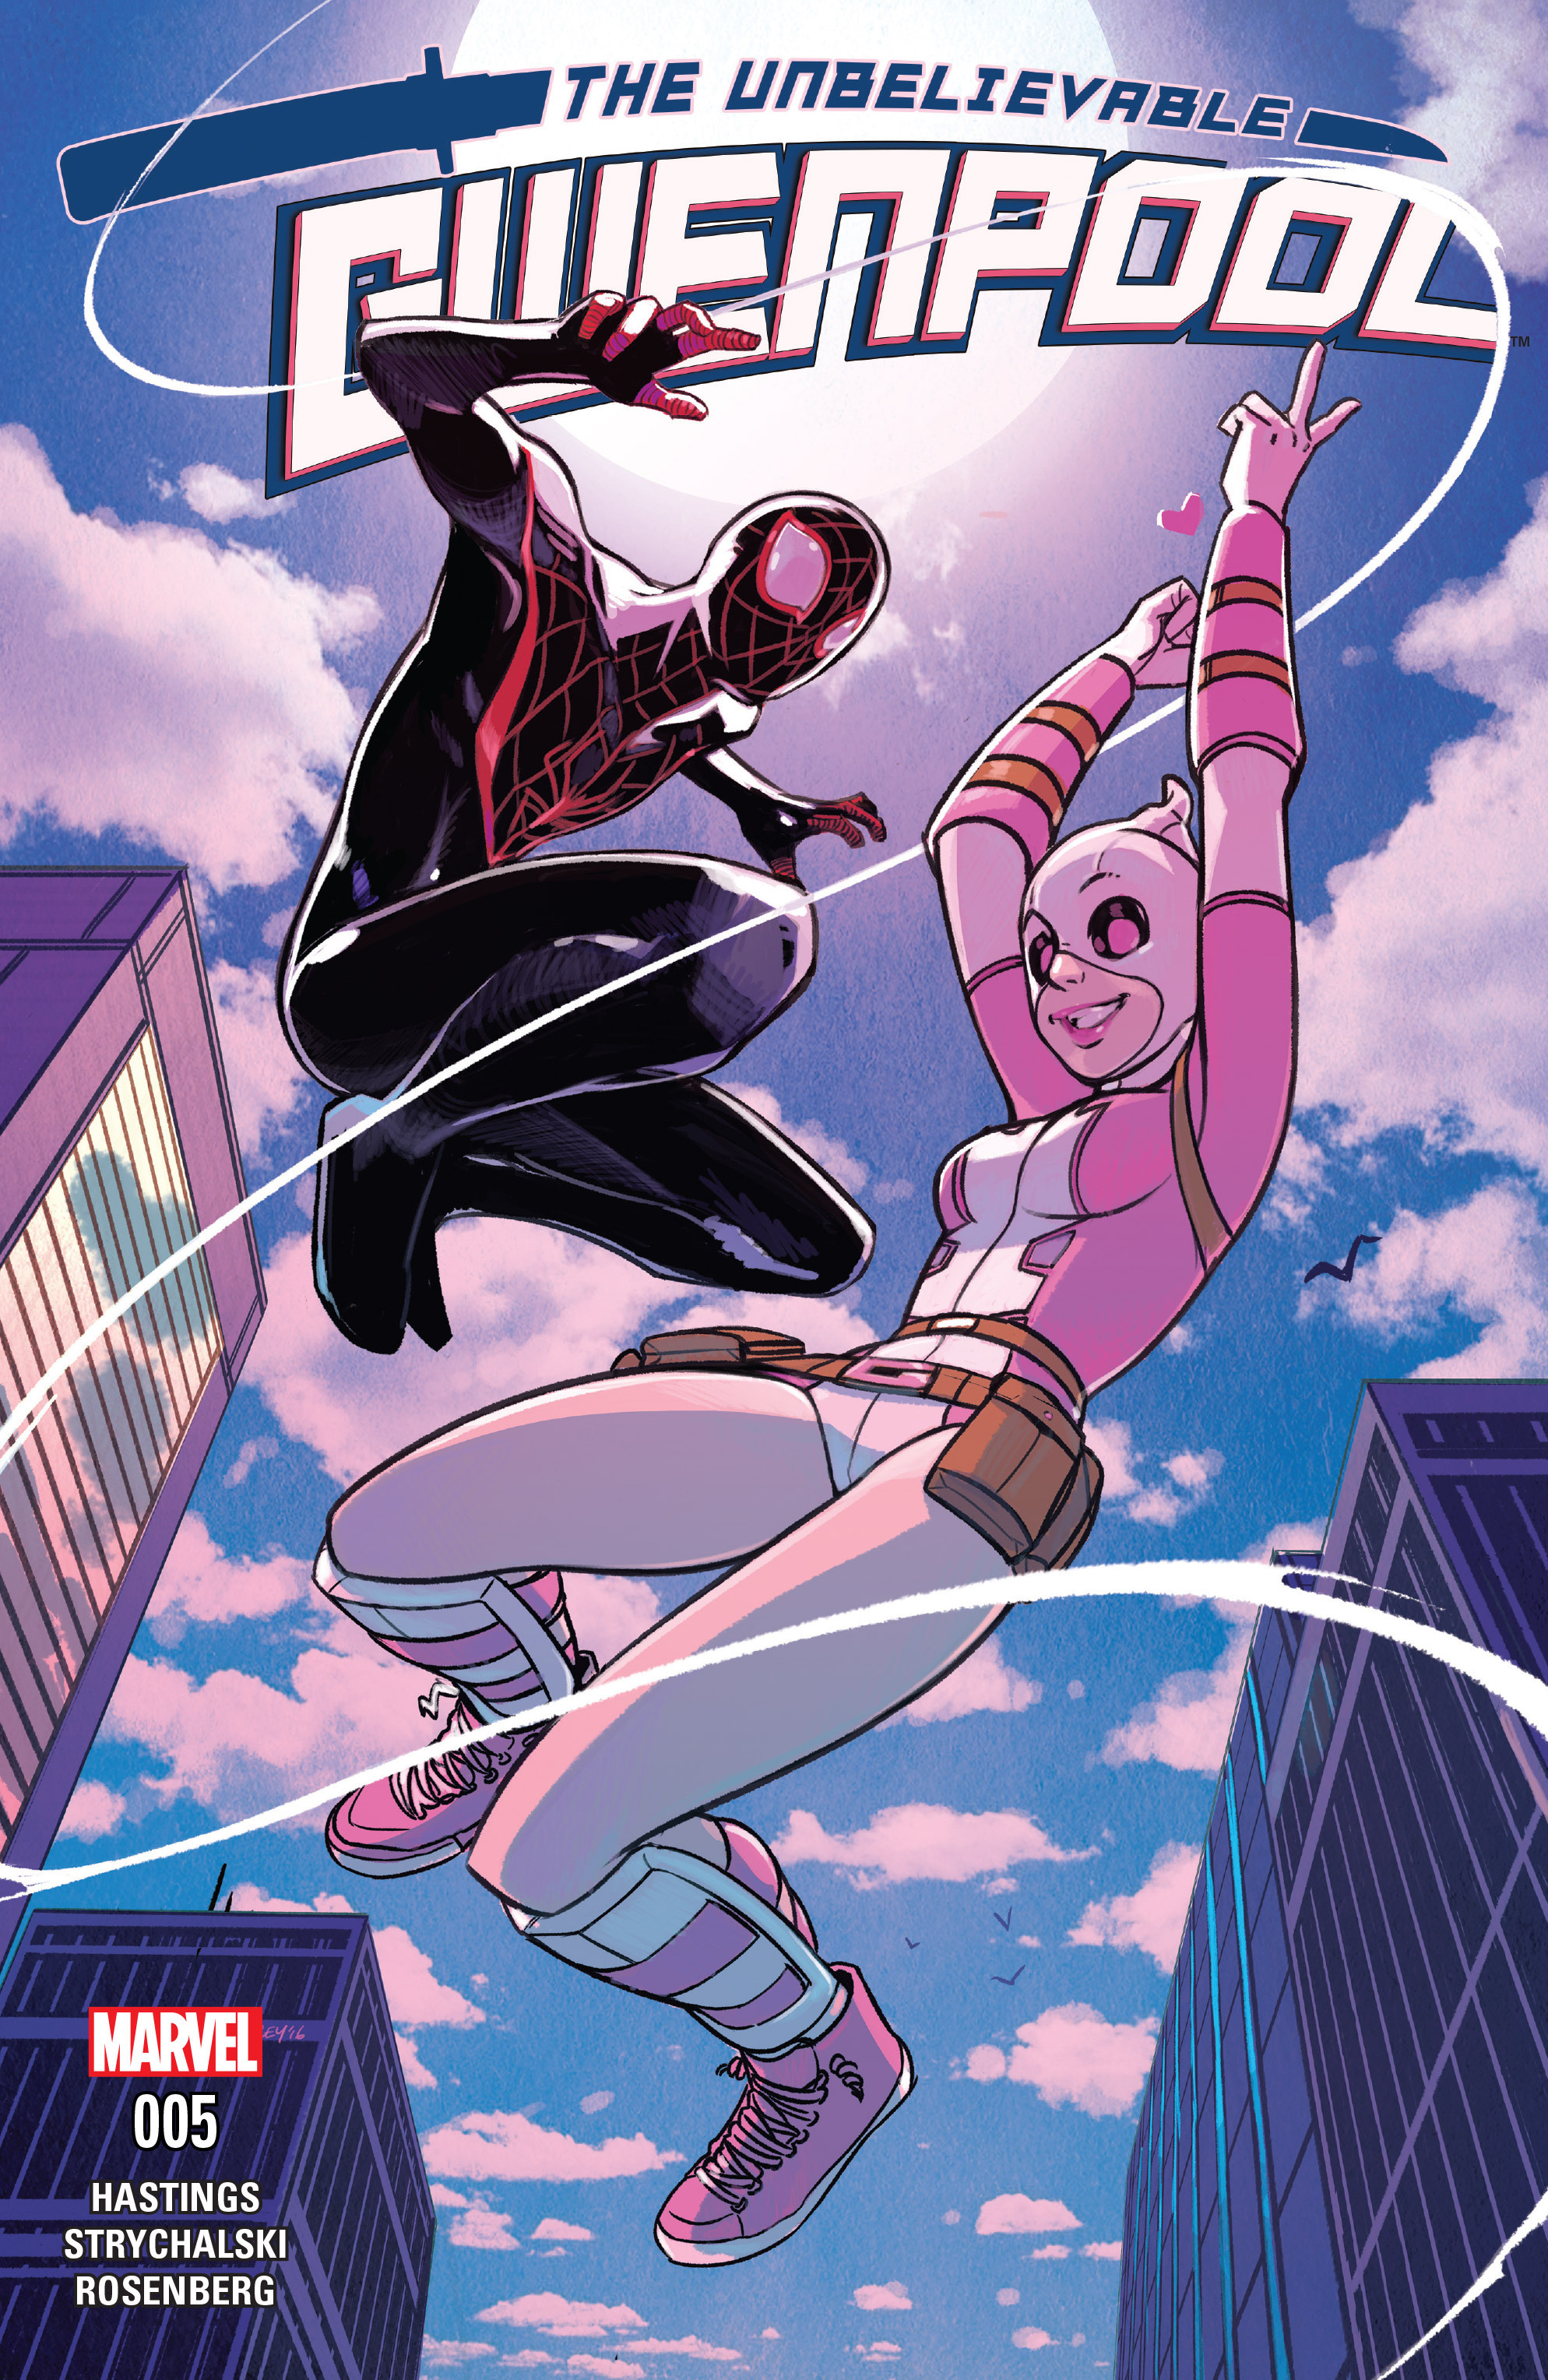 The Unbelievable Gwenpool Issue 5 | Read The Unbelievable Gwenpool Issue 5  comic online in high quality. Read Full Comic online for free - Read comics  online in high quality .|viewcomiconline.com